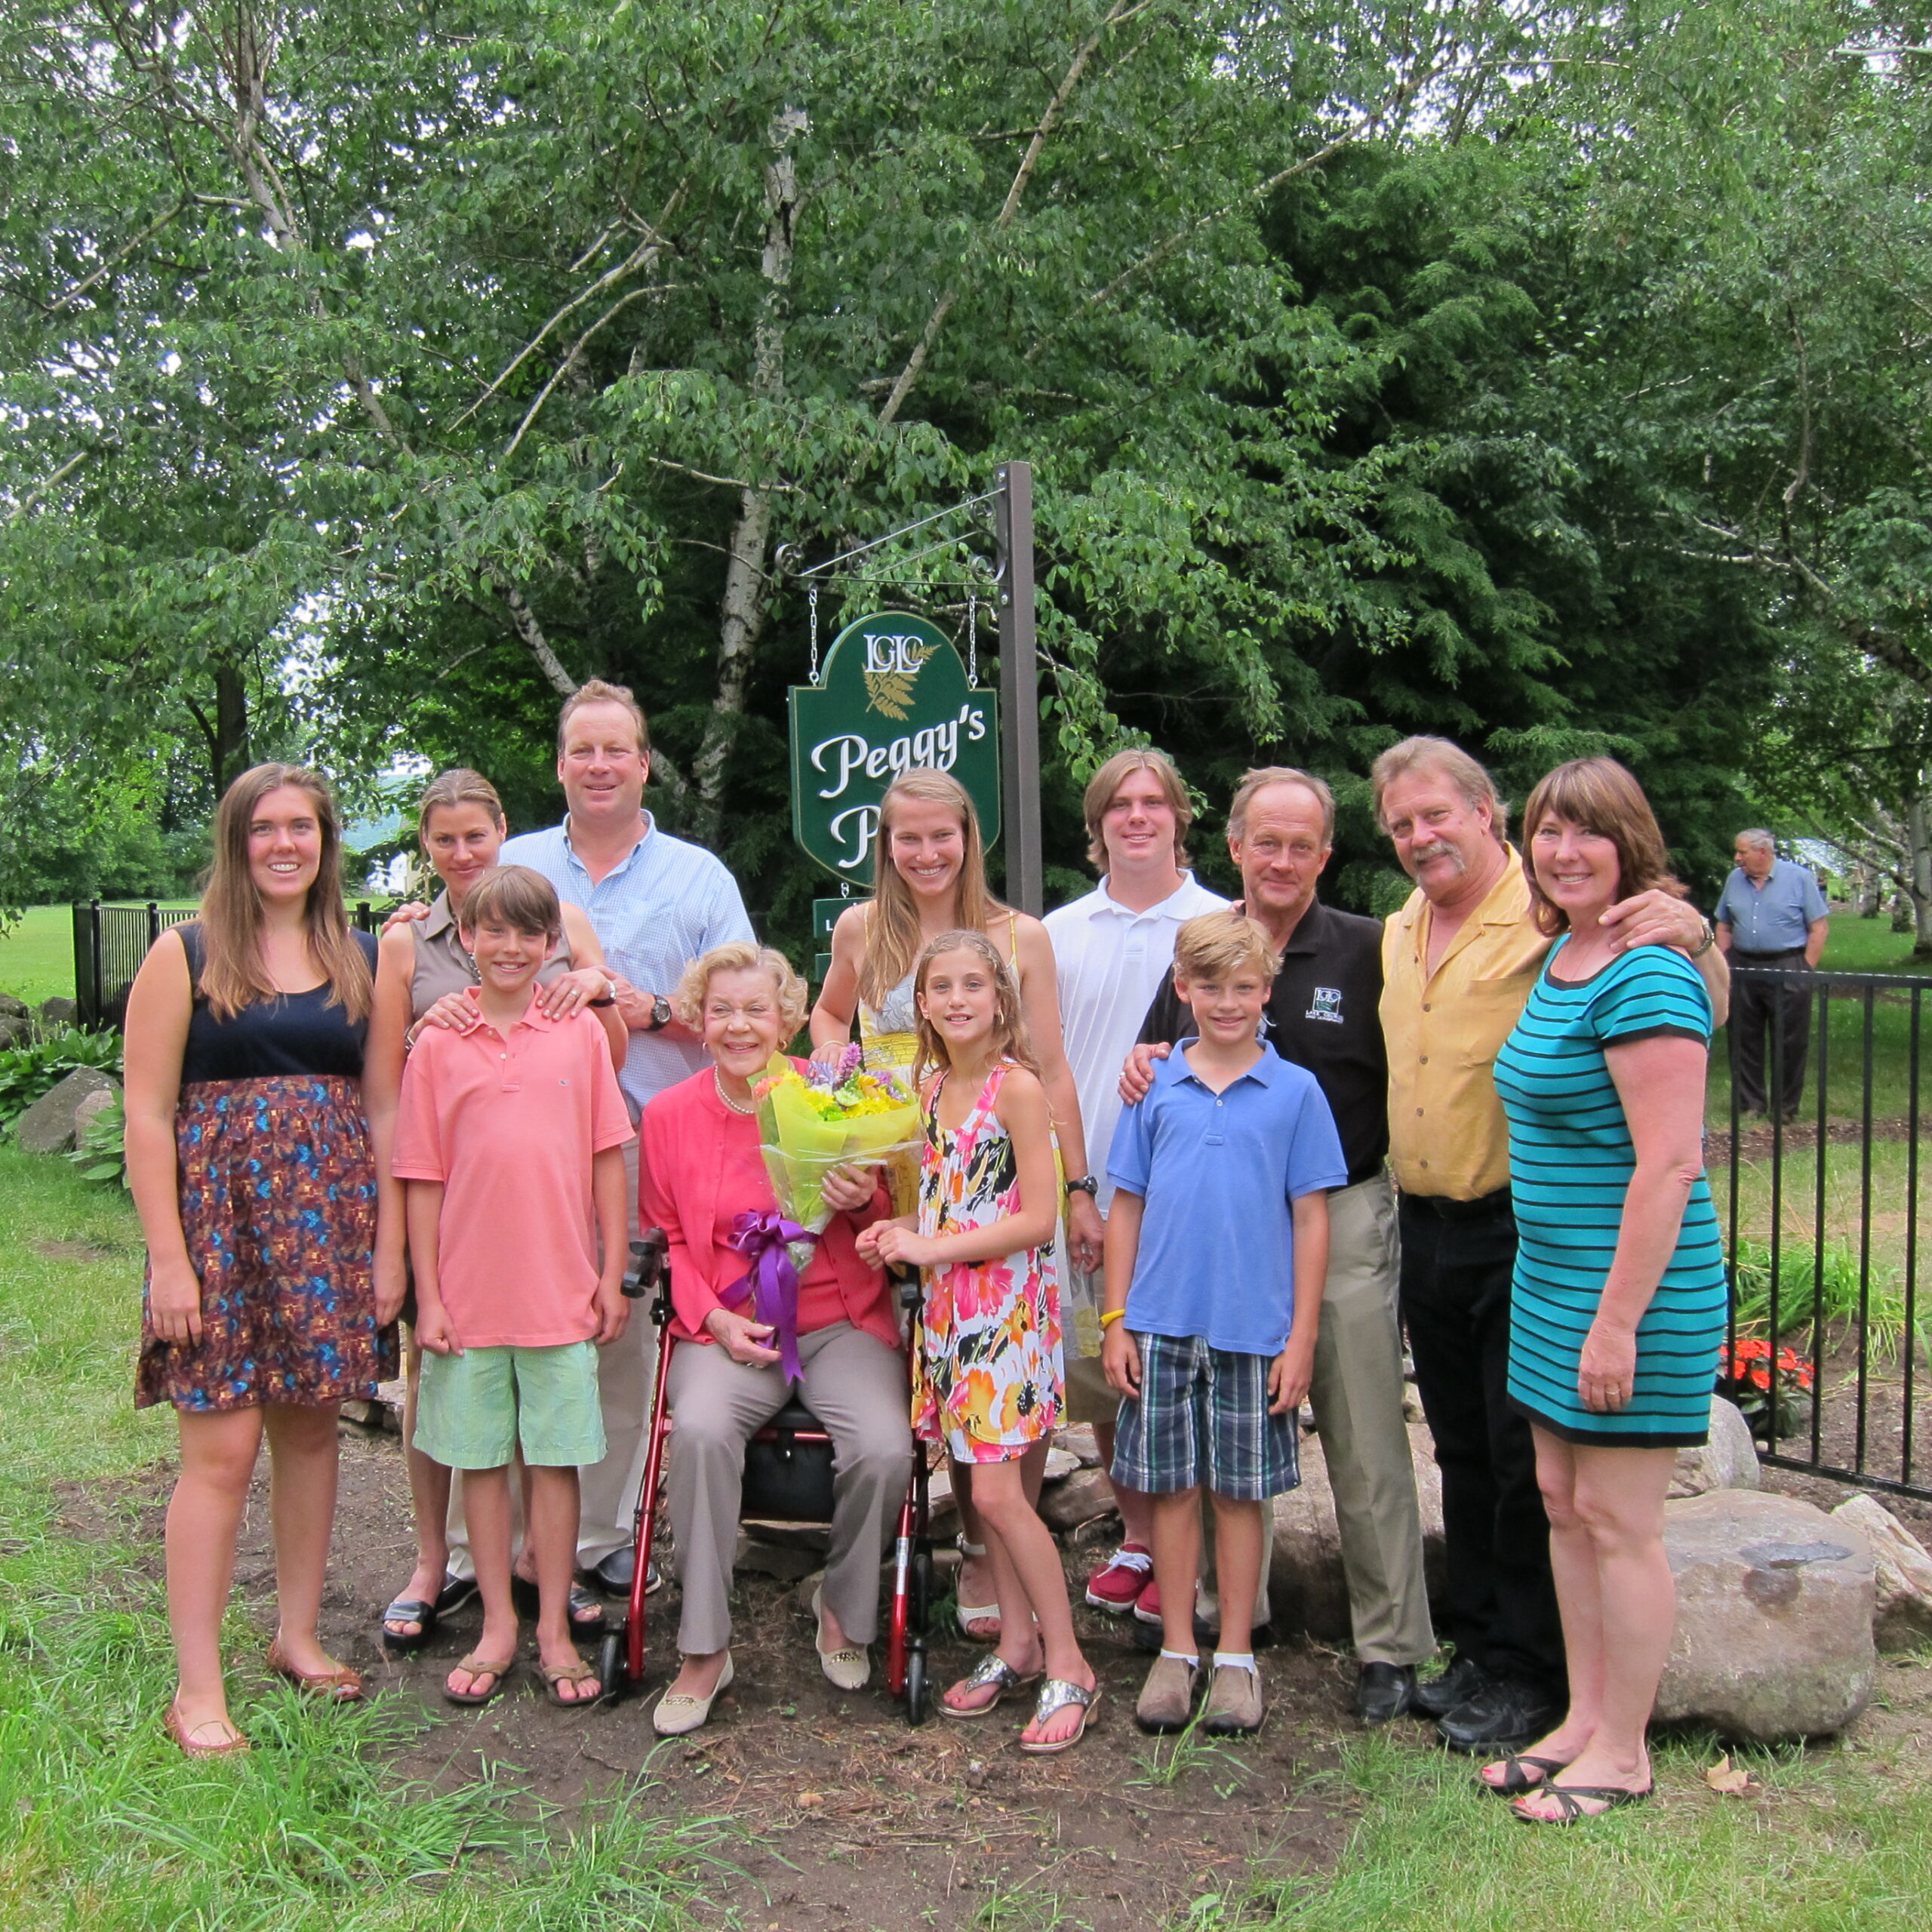 Peggy and the Darrin family joined together June 24, 2011, to celebrate the dedication of Peggy's Point, in Hague, NY.